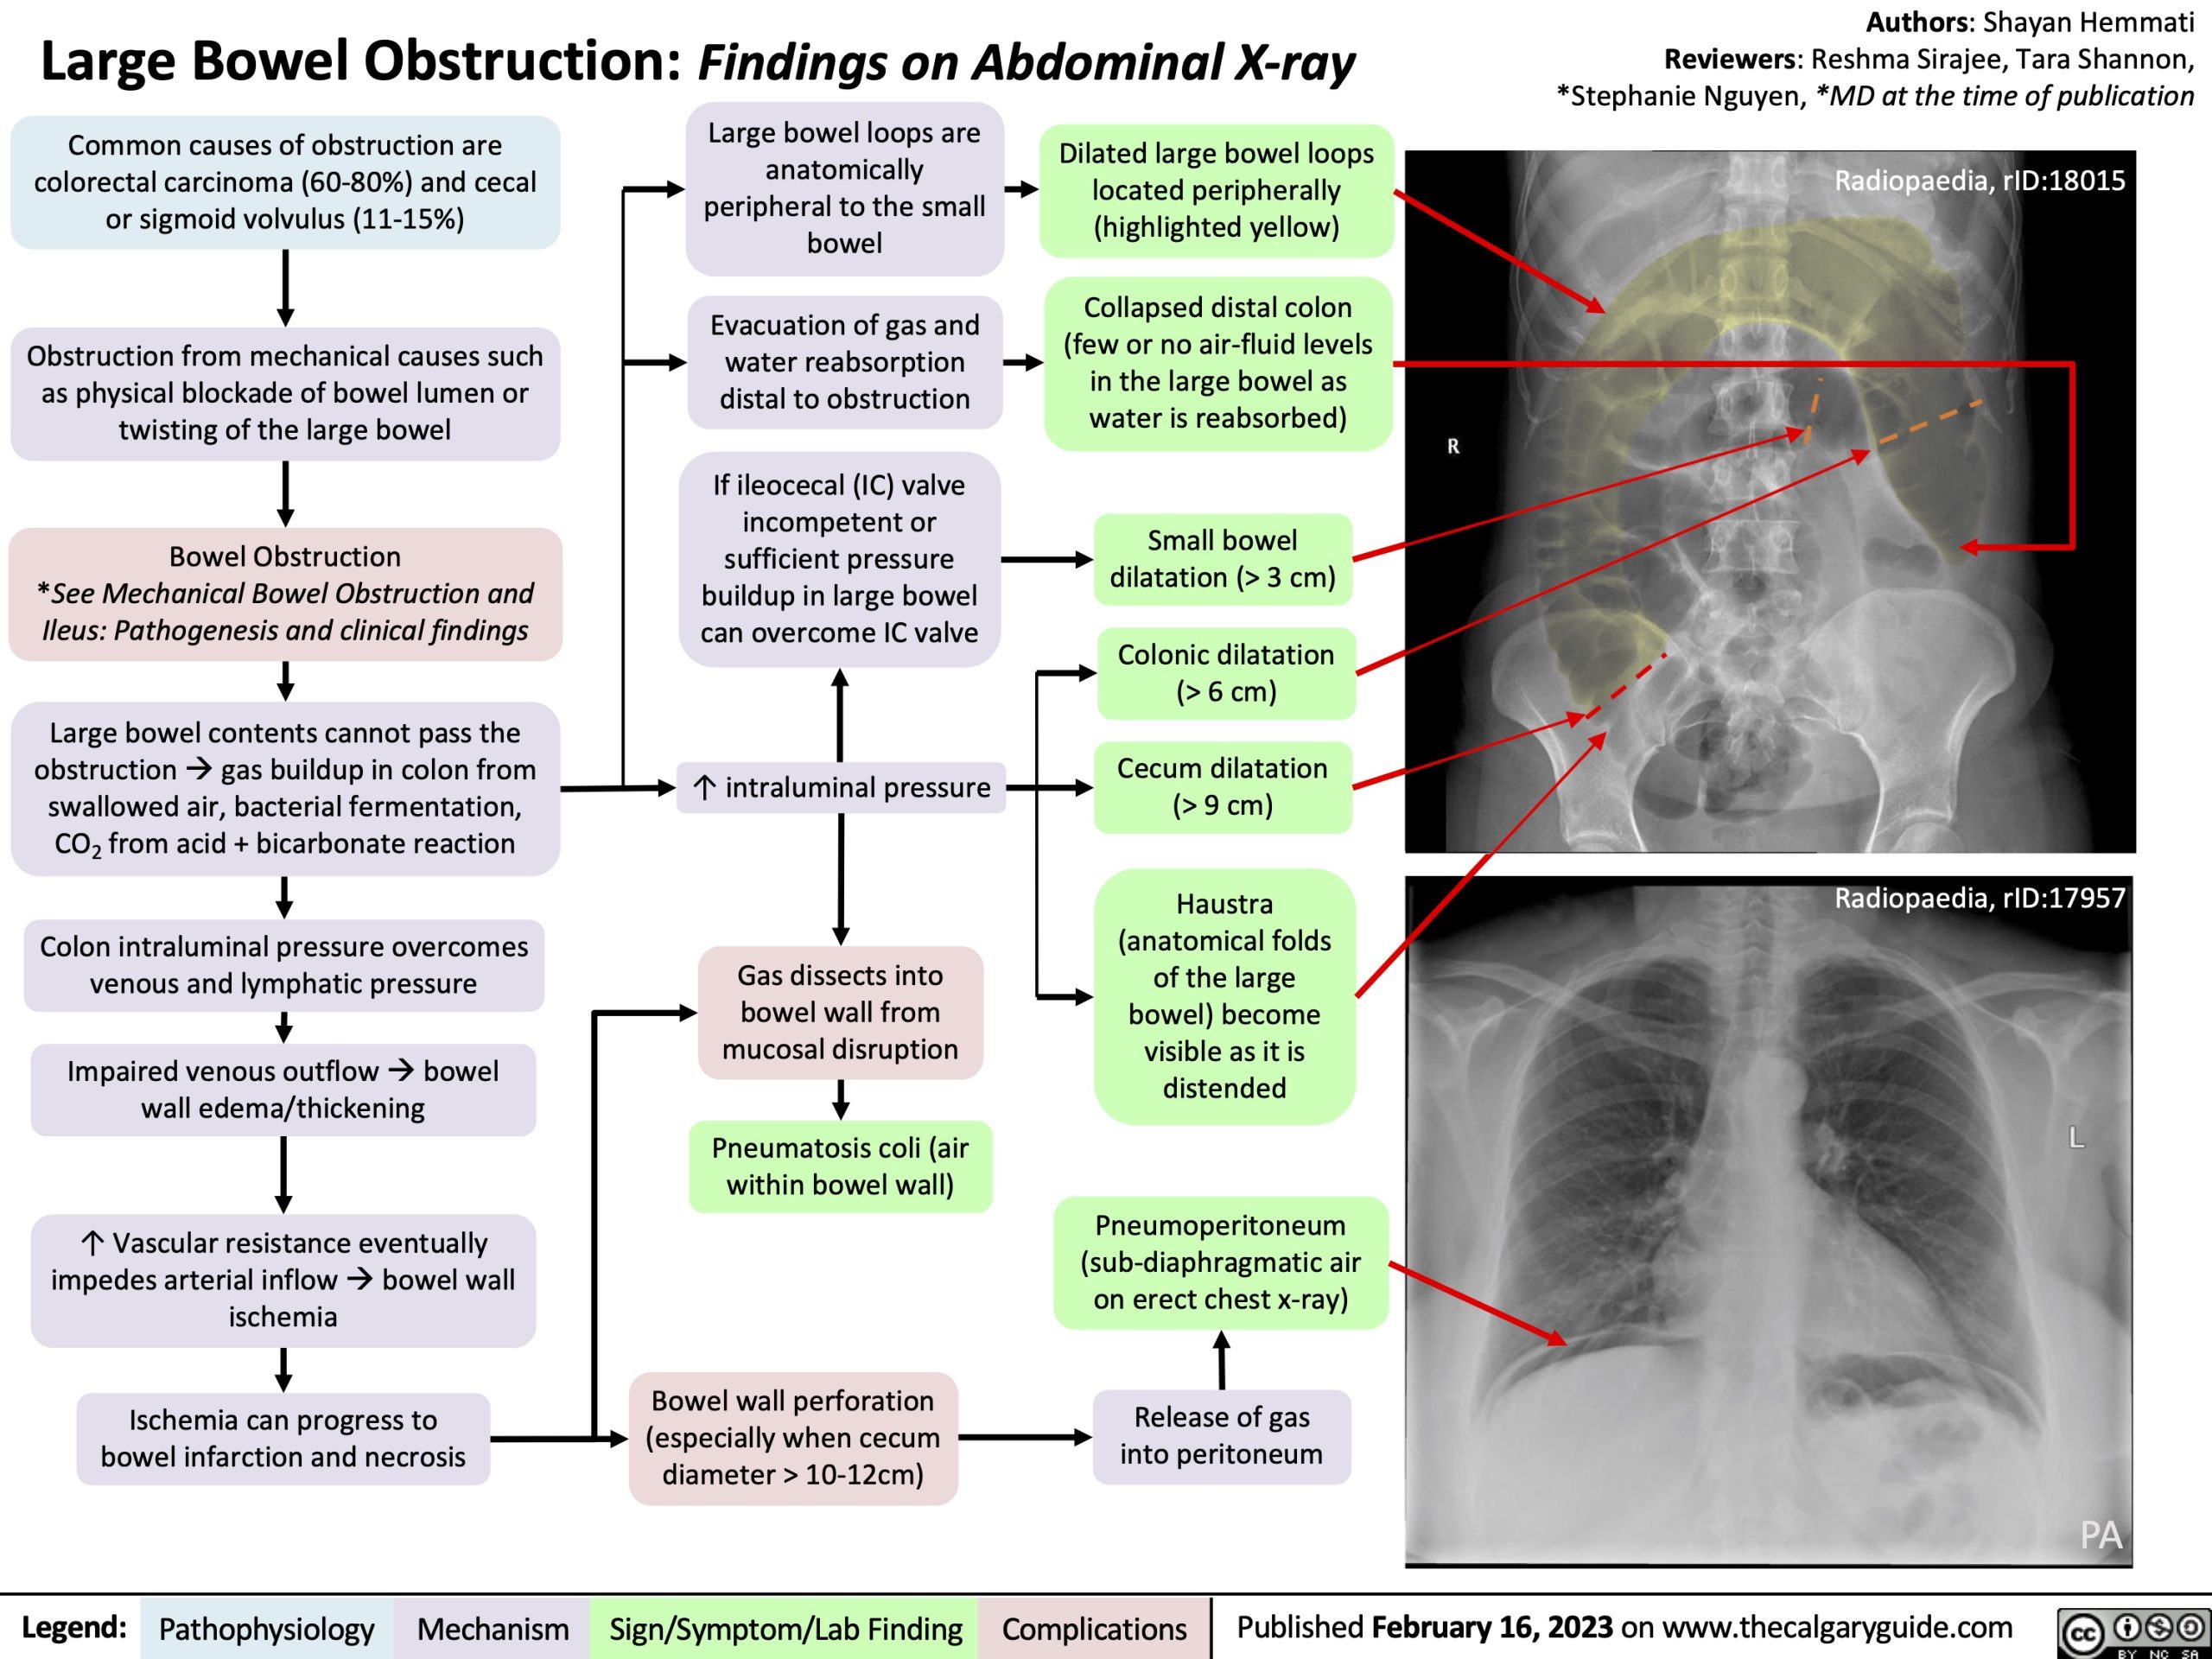 Large Bowel Obstruction: Findings on Abdominal X-ray